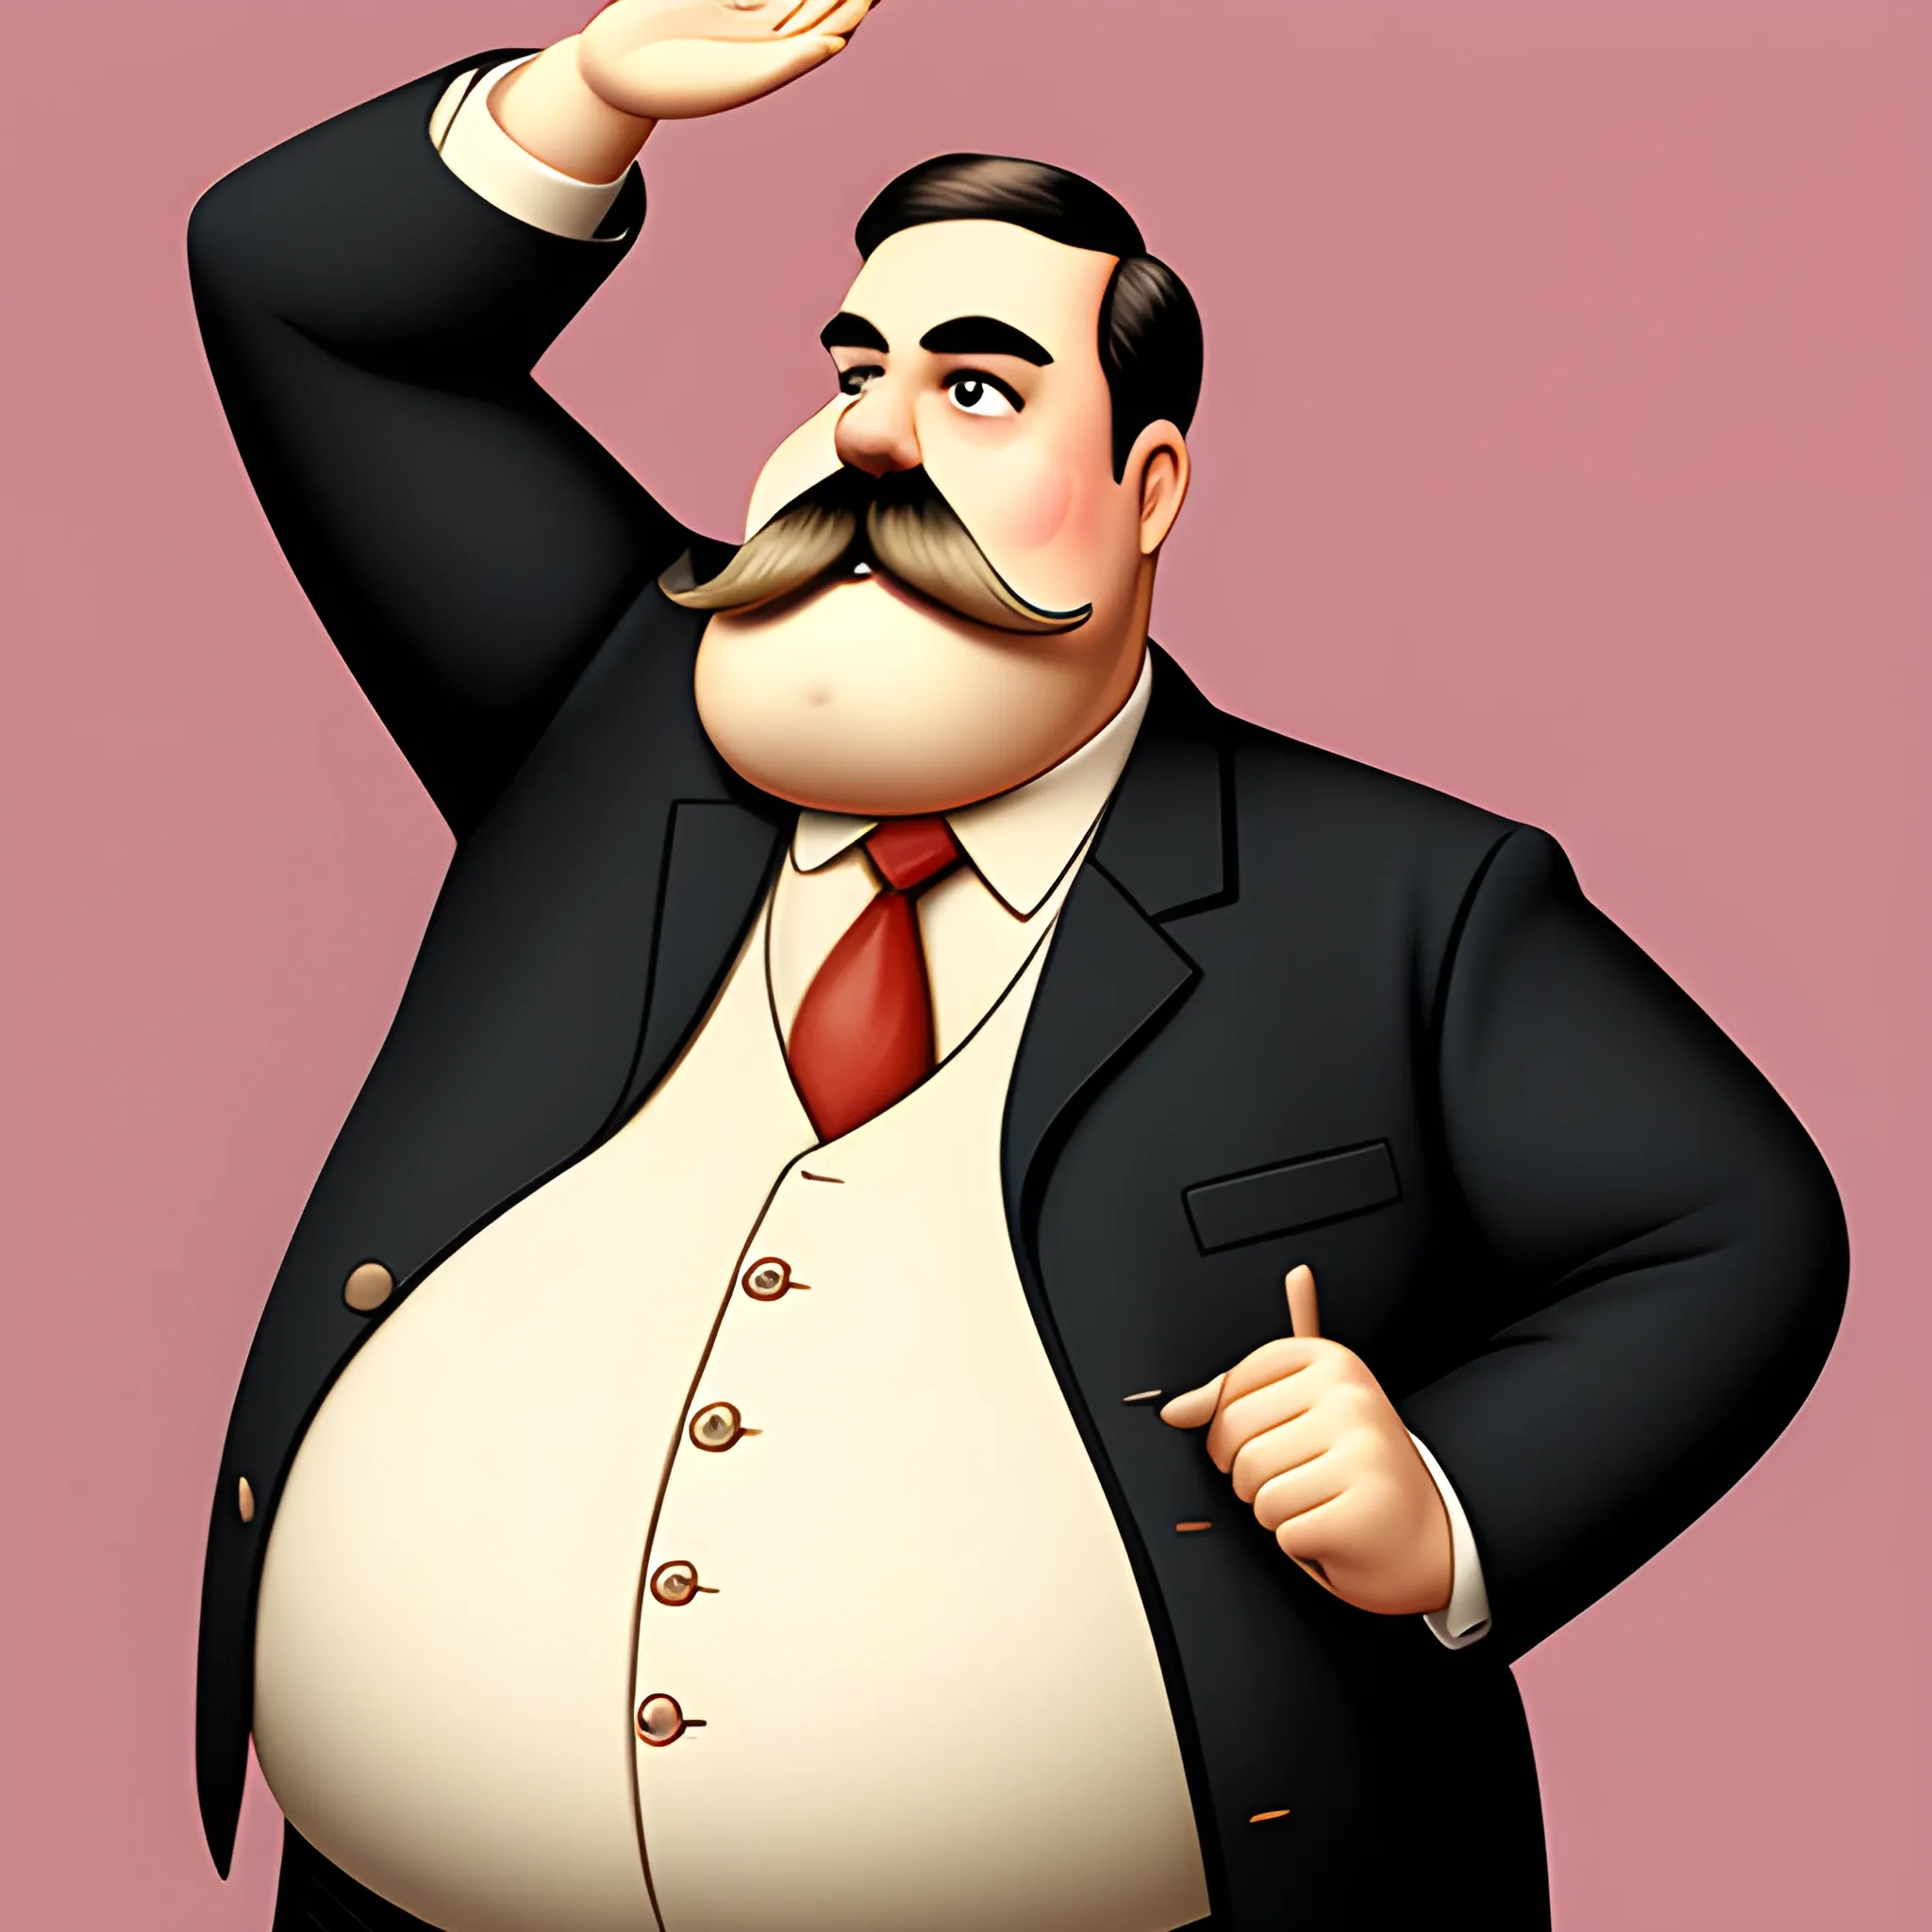 A tall fat man with a mustache is saluting